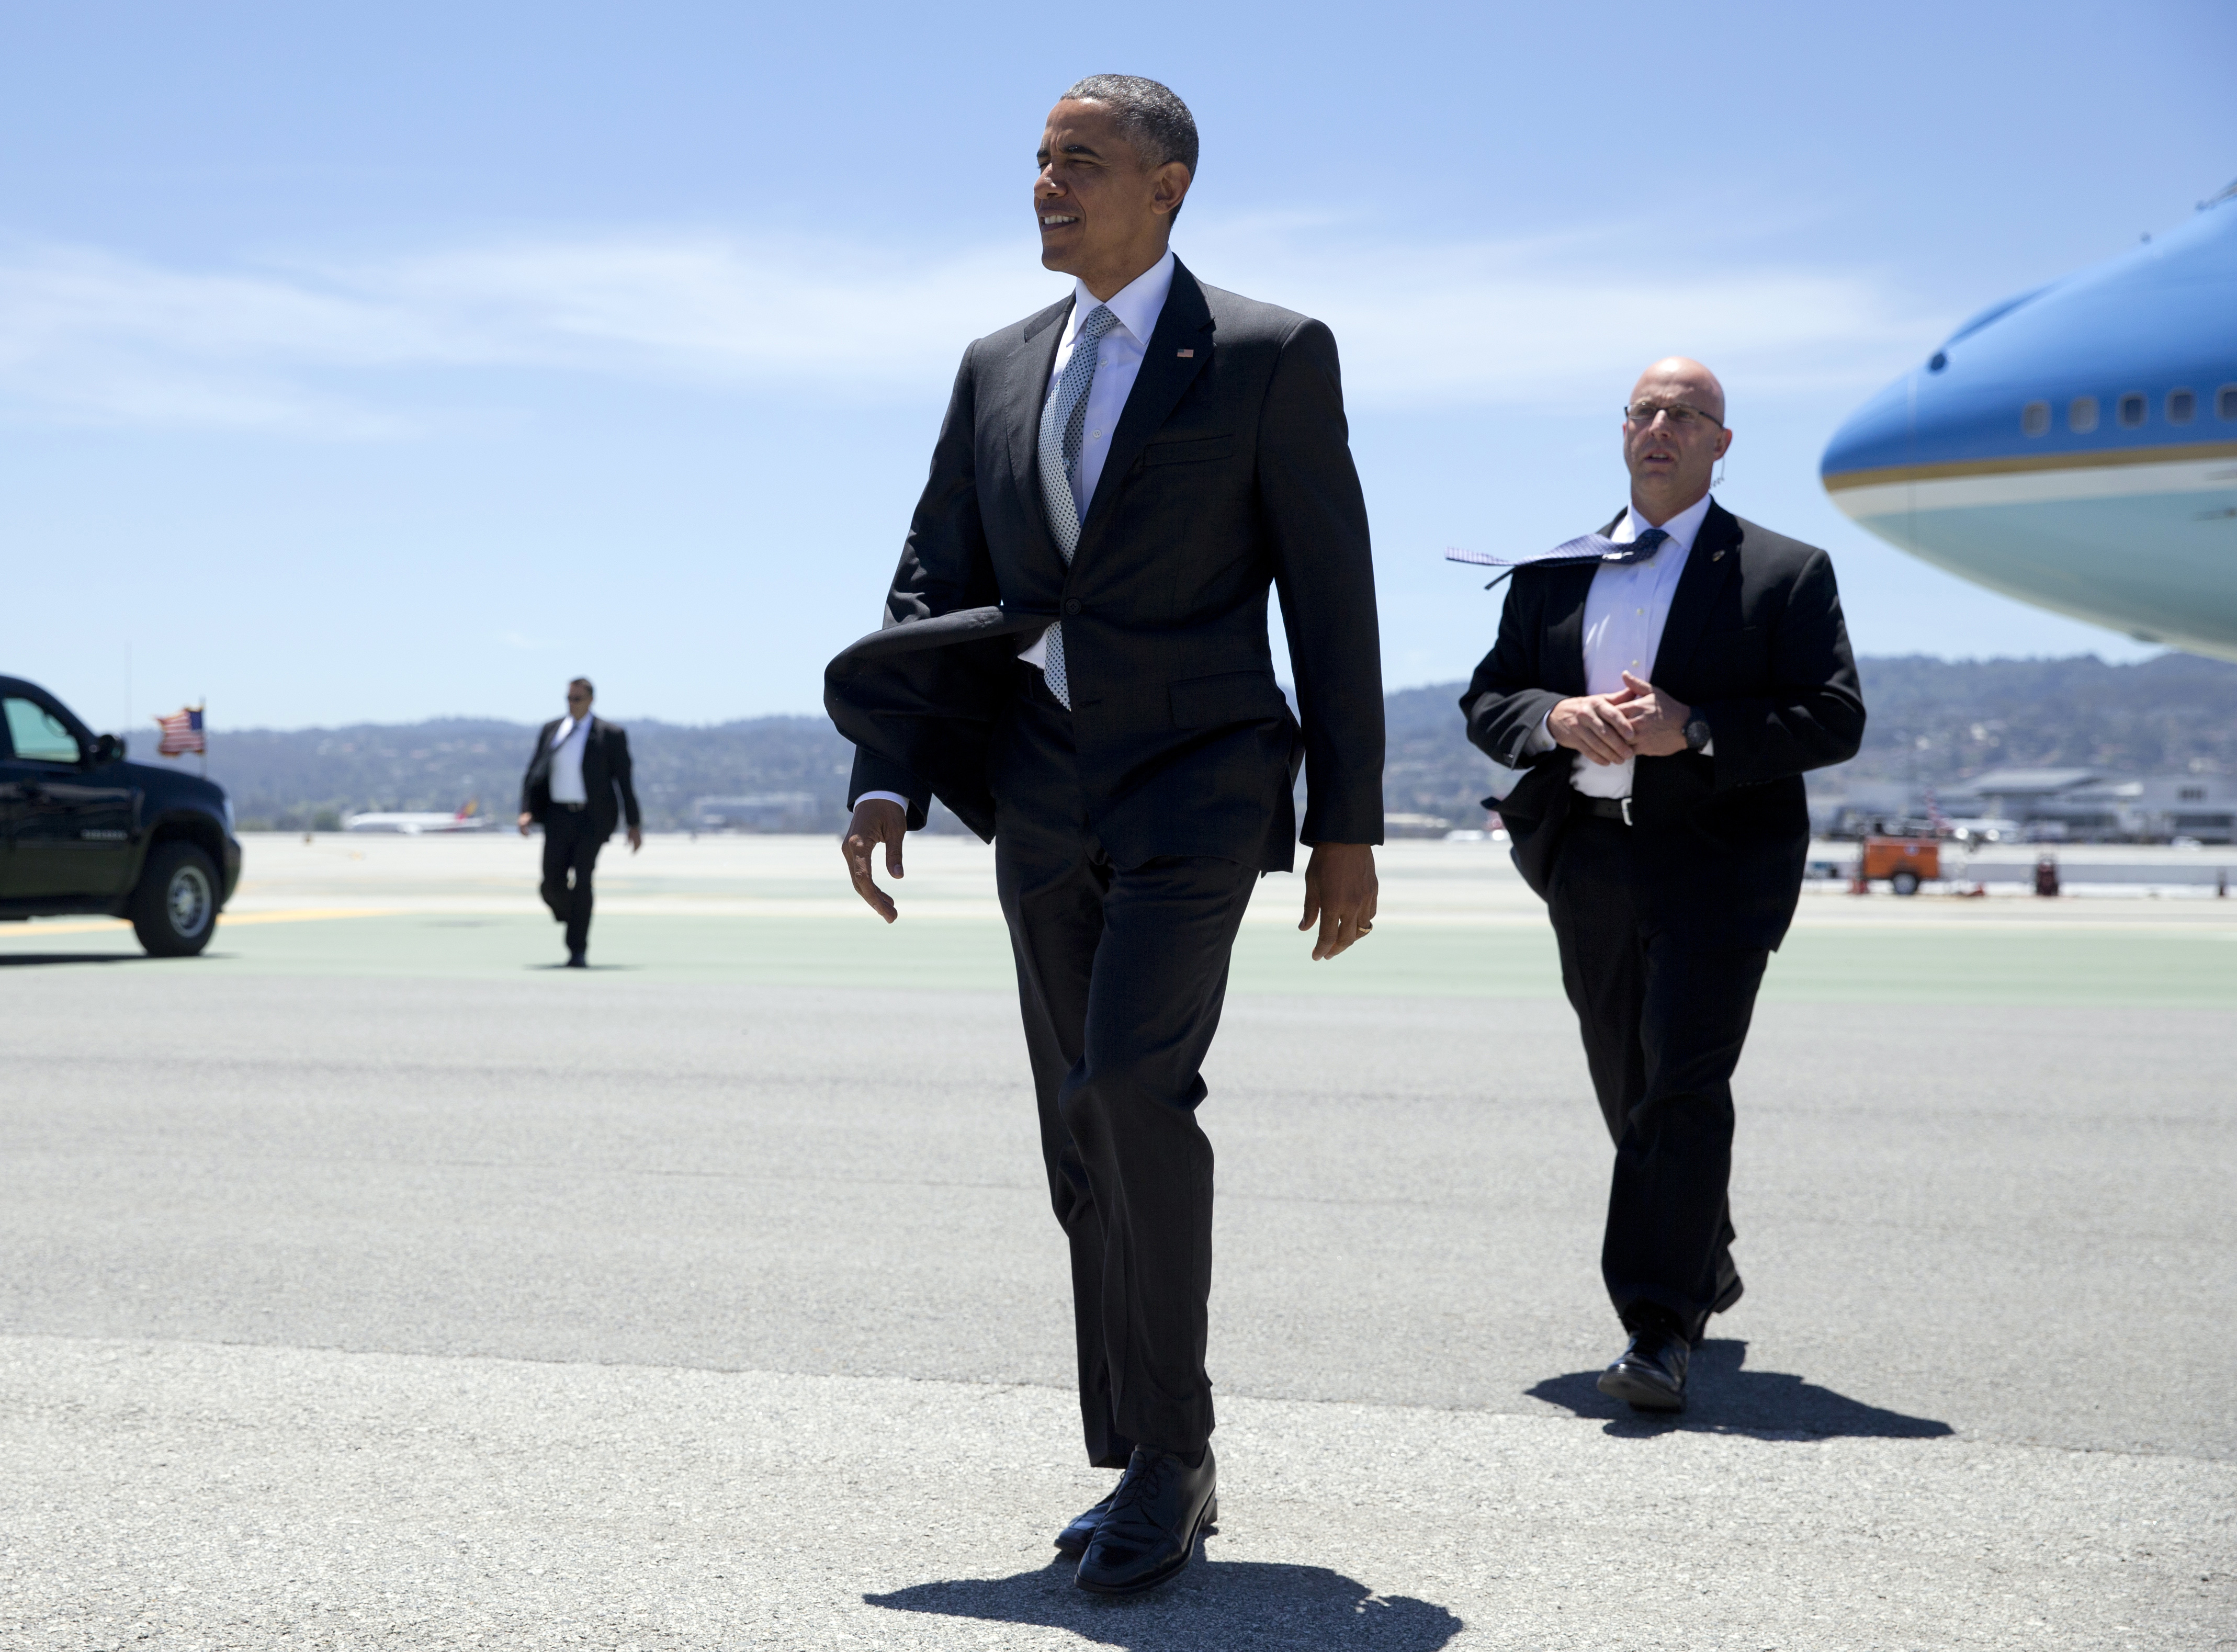 President Barack Obama walks across the tarmac to greet people as he arrives on Air Force One at San Francisco International airport June 19, 2015. (Carolyn Kaster—AP)